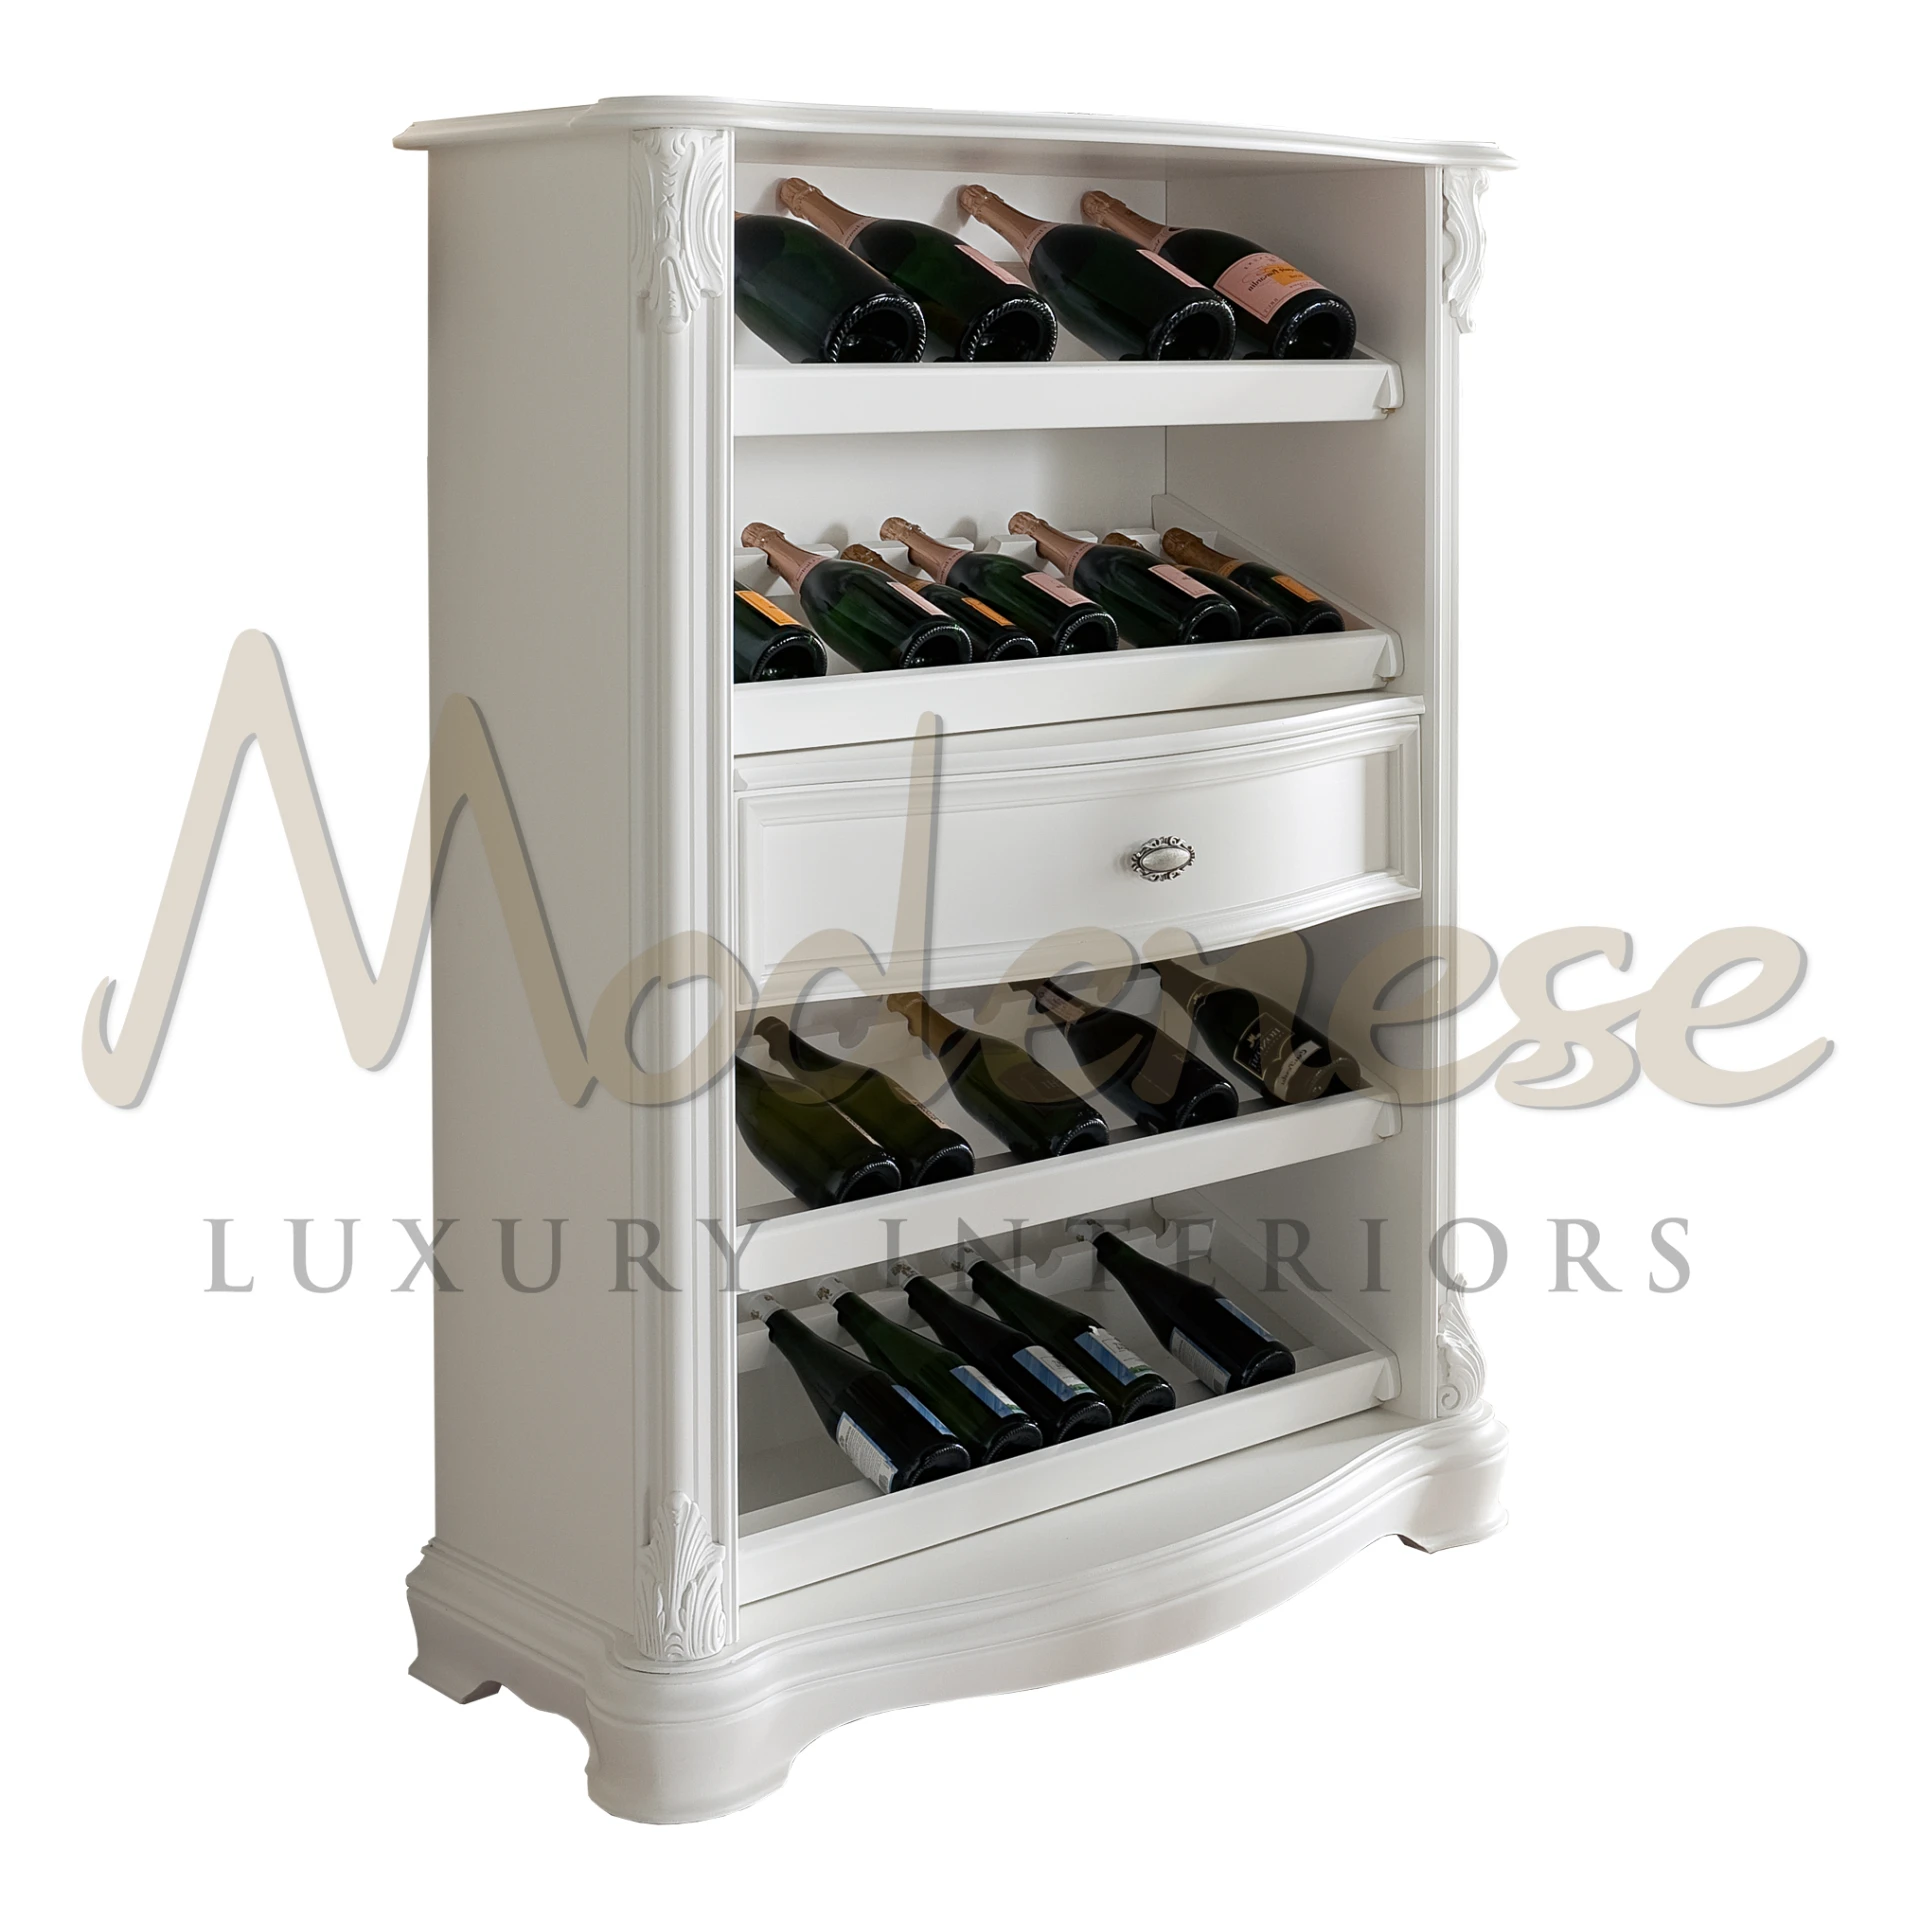 Functional and stylish, this rack includes a drawer and shelves. Solid wood construction in a white lacquer finish.